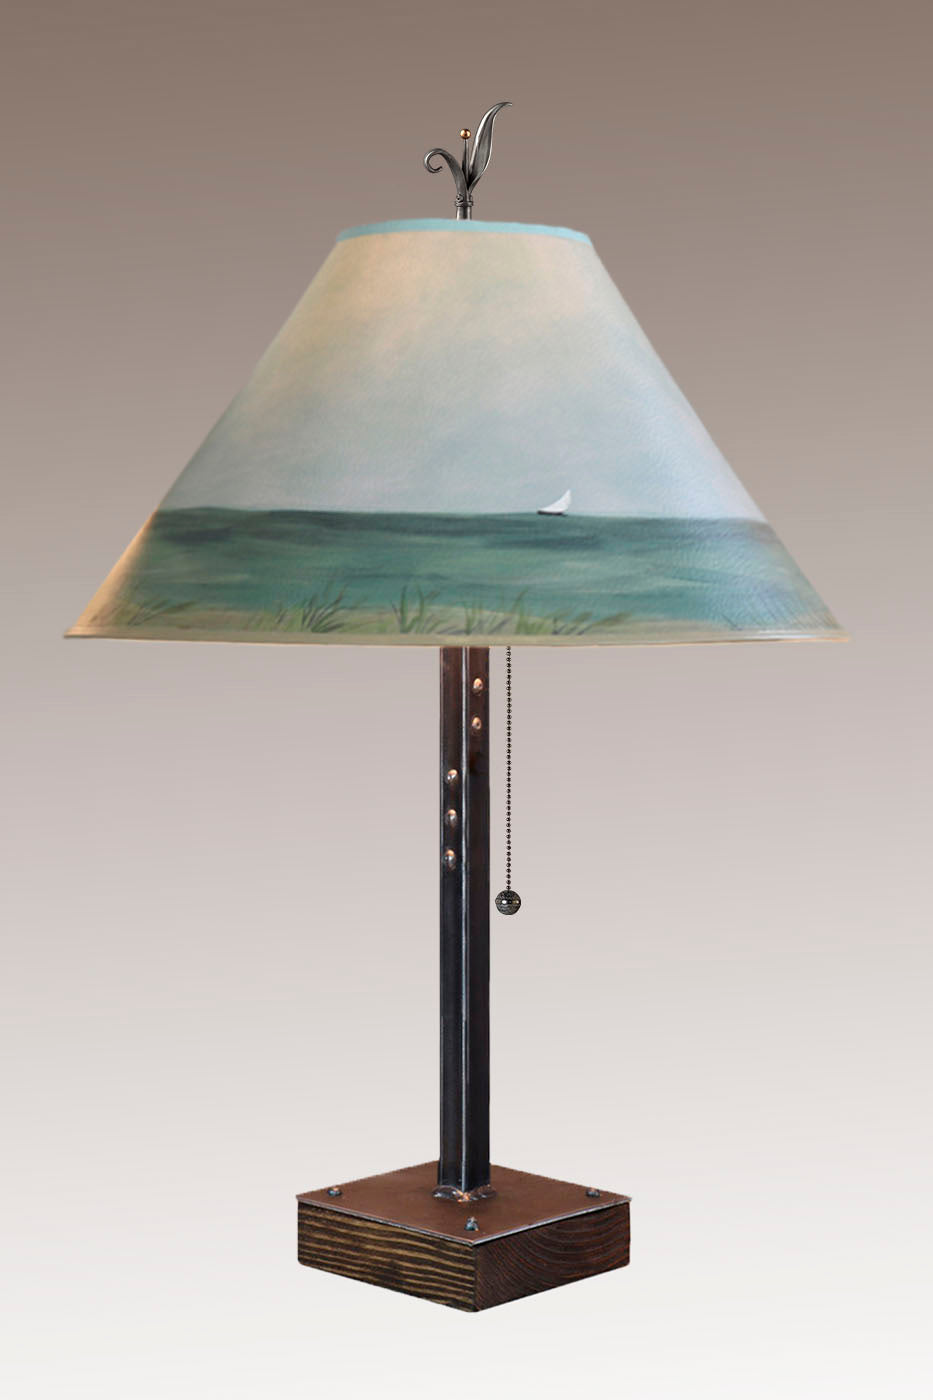 Janna Ugone &amp; Co Table Lamps Steel Table Lamp on Wood with Large Conical Shade in Shore